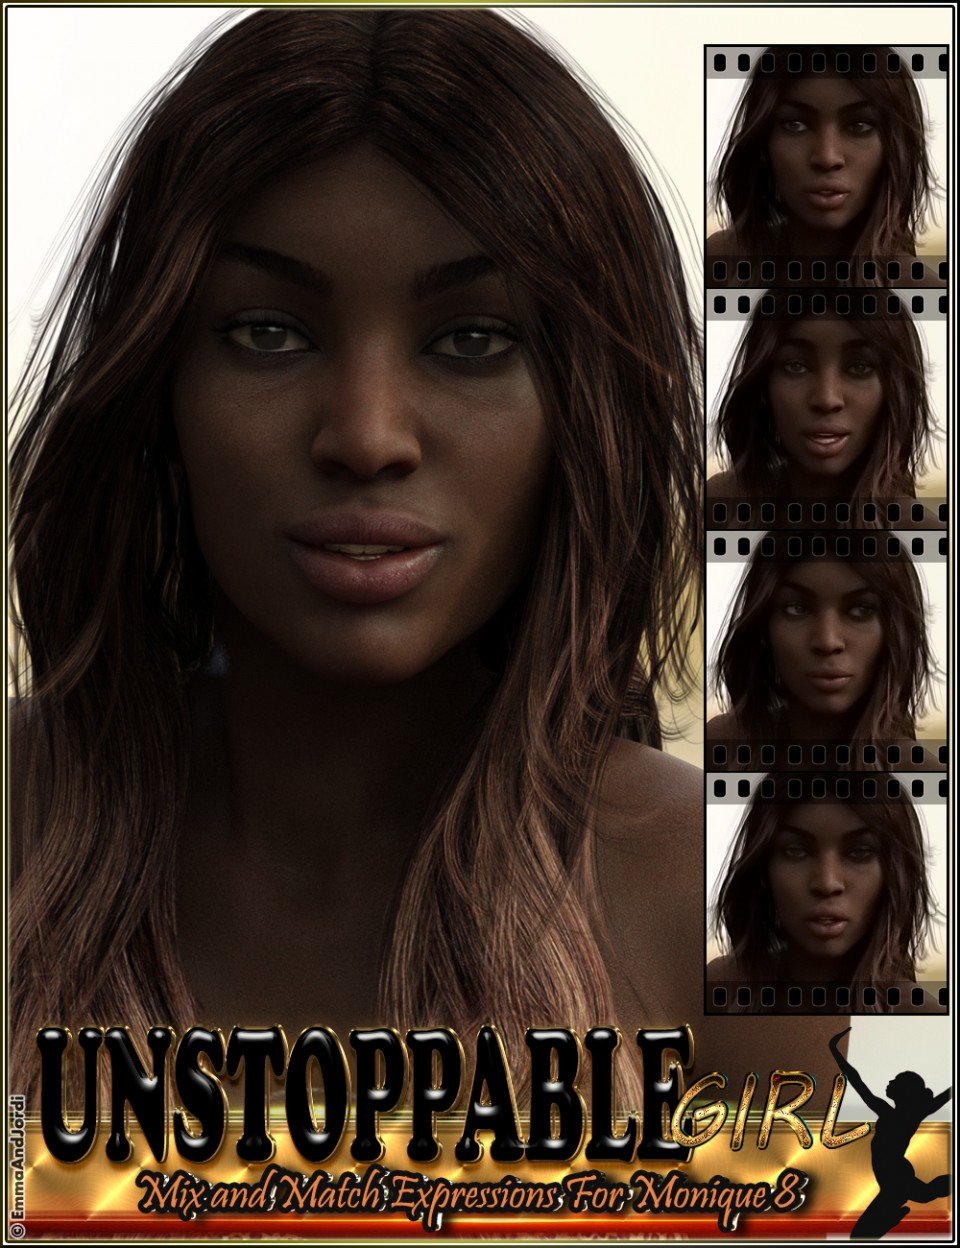 Unstoppable Girl Mix And Match Expressions For Monique 8 And Genesis 8 Female(s)_DAZ3DDL